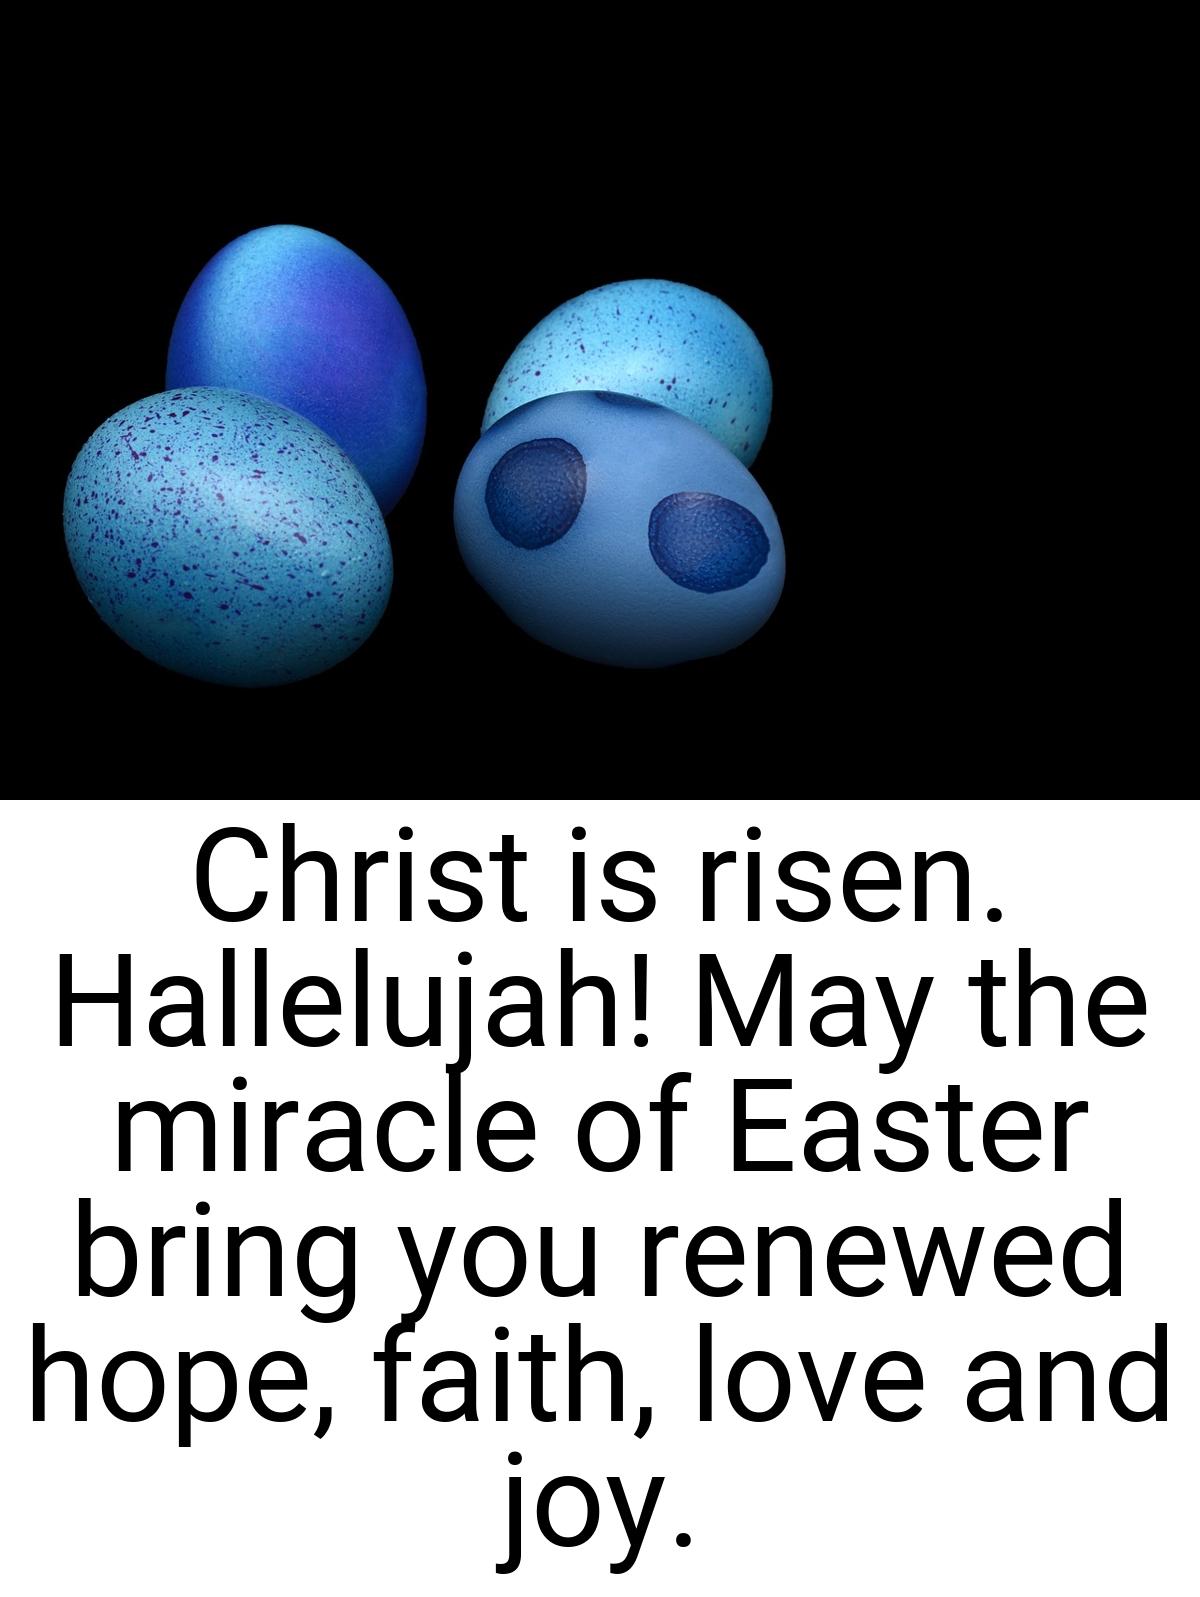 Christ is risen. Hallelujah! May the miracle of Easter